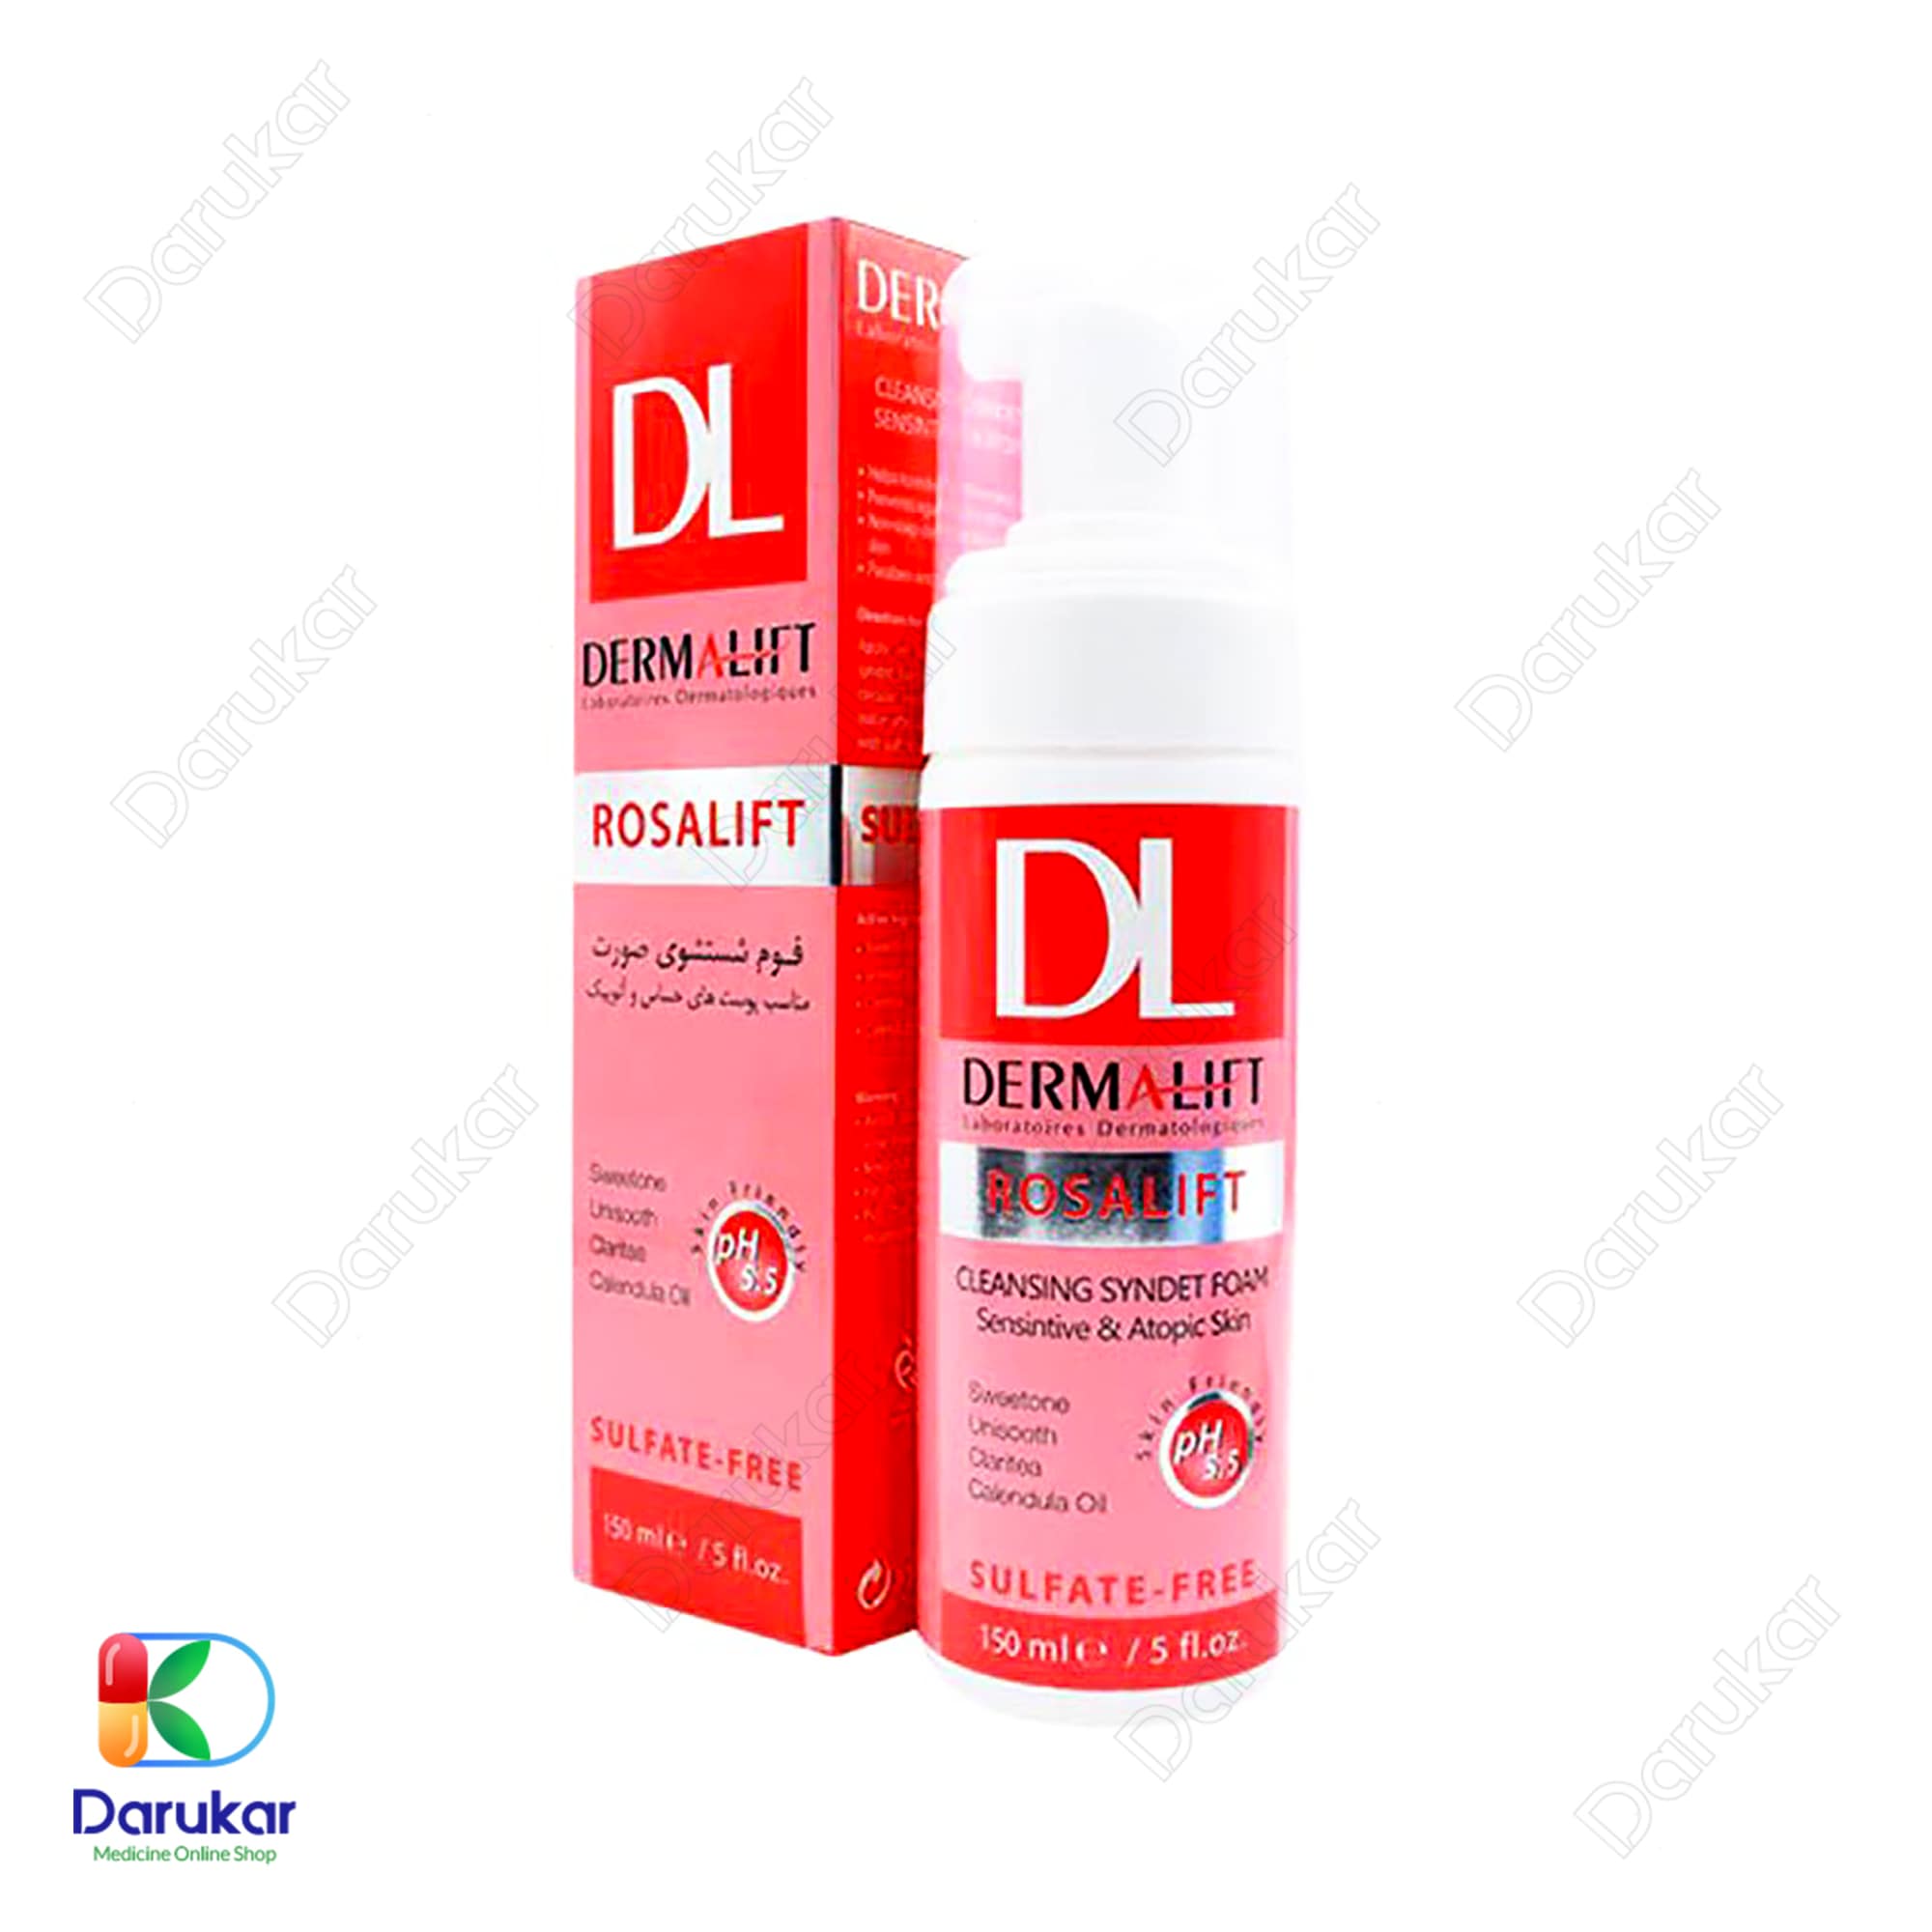 Dermalift Rosalift Cleaning Syndet Foam for Sensitive and Atopic Skin 3